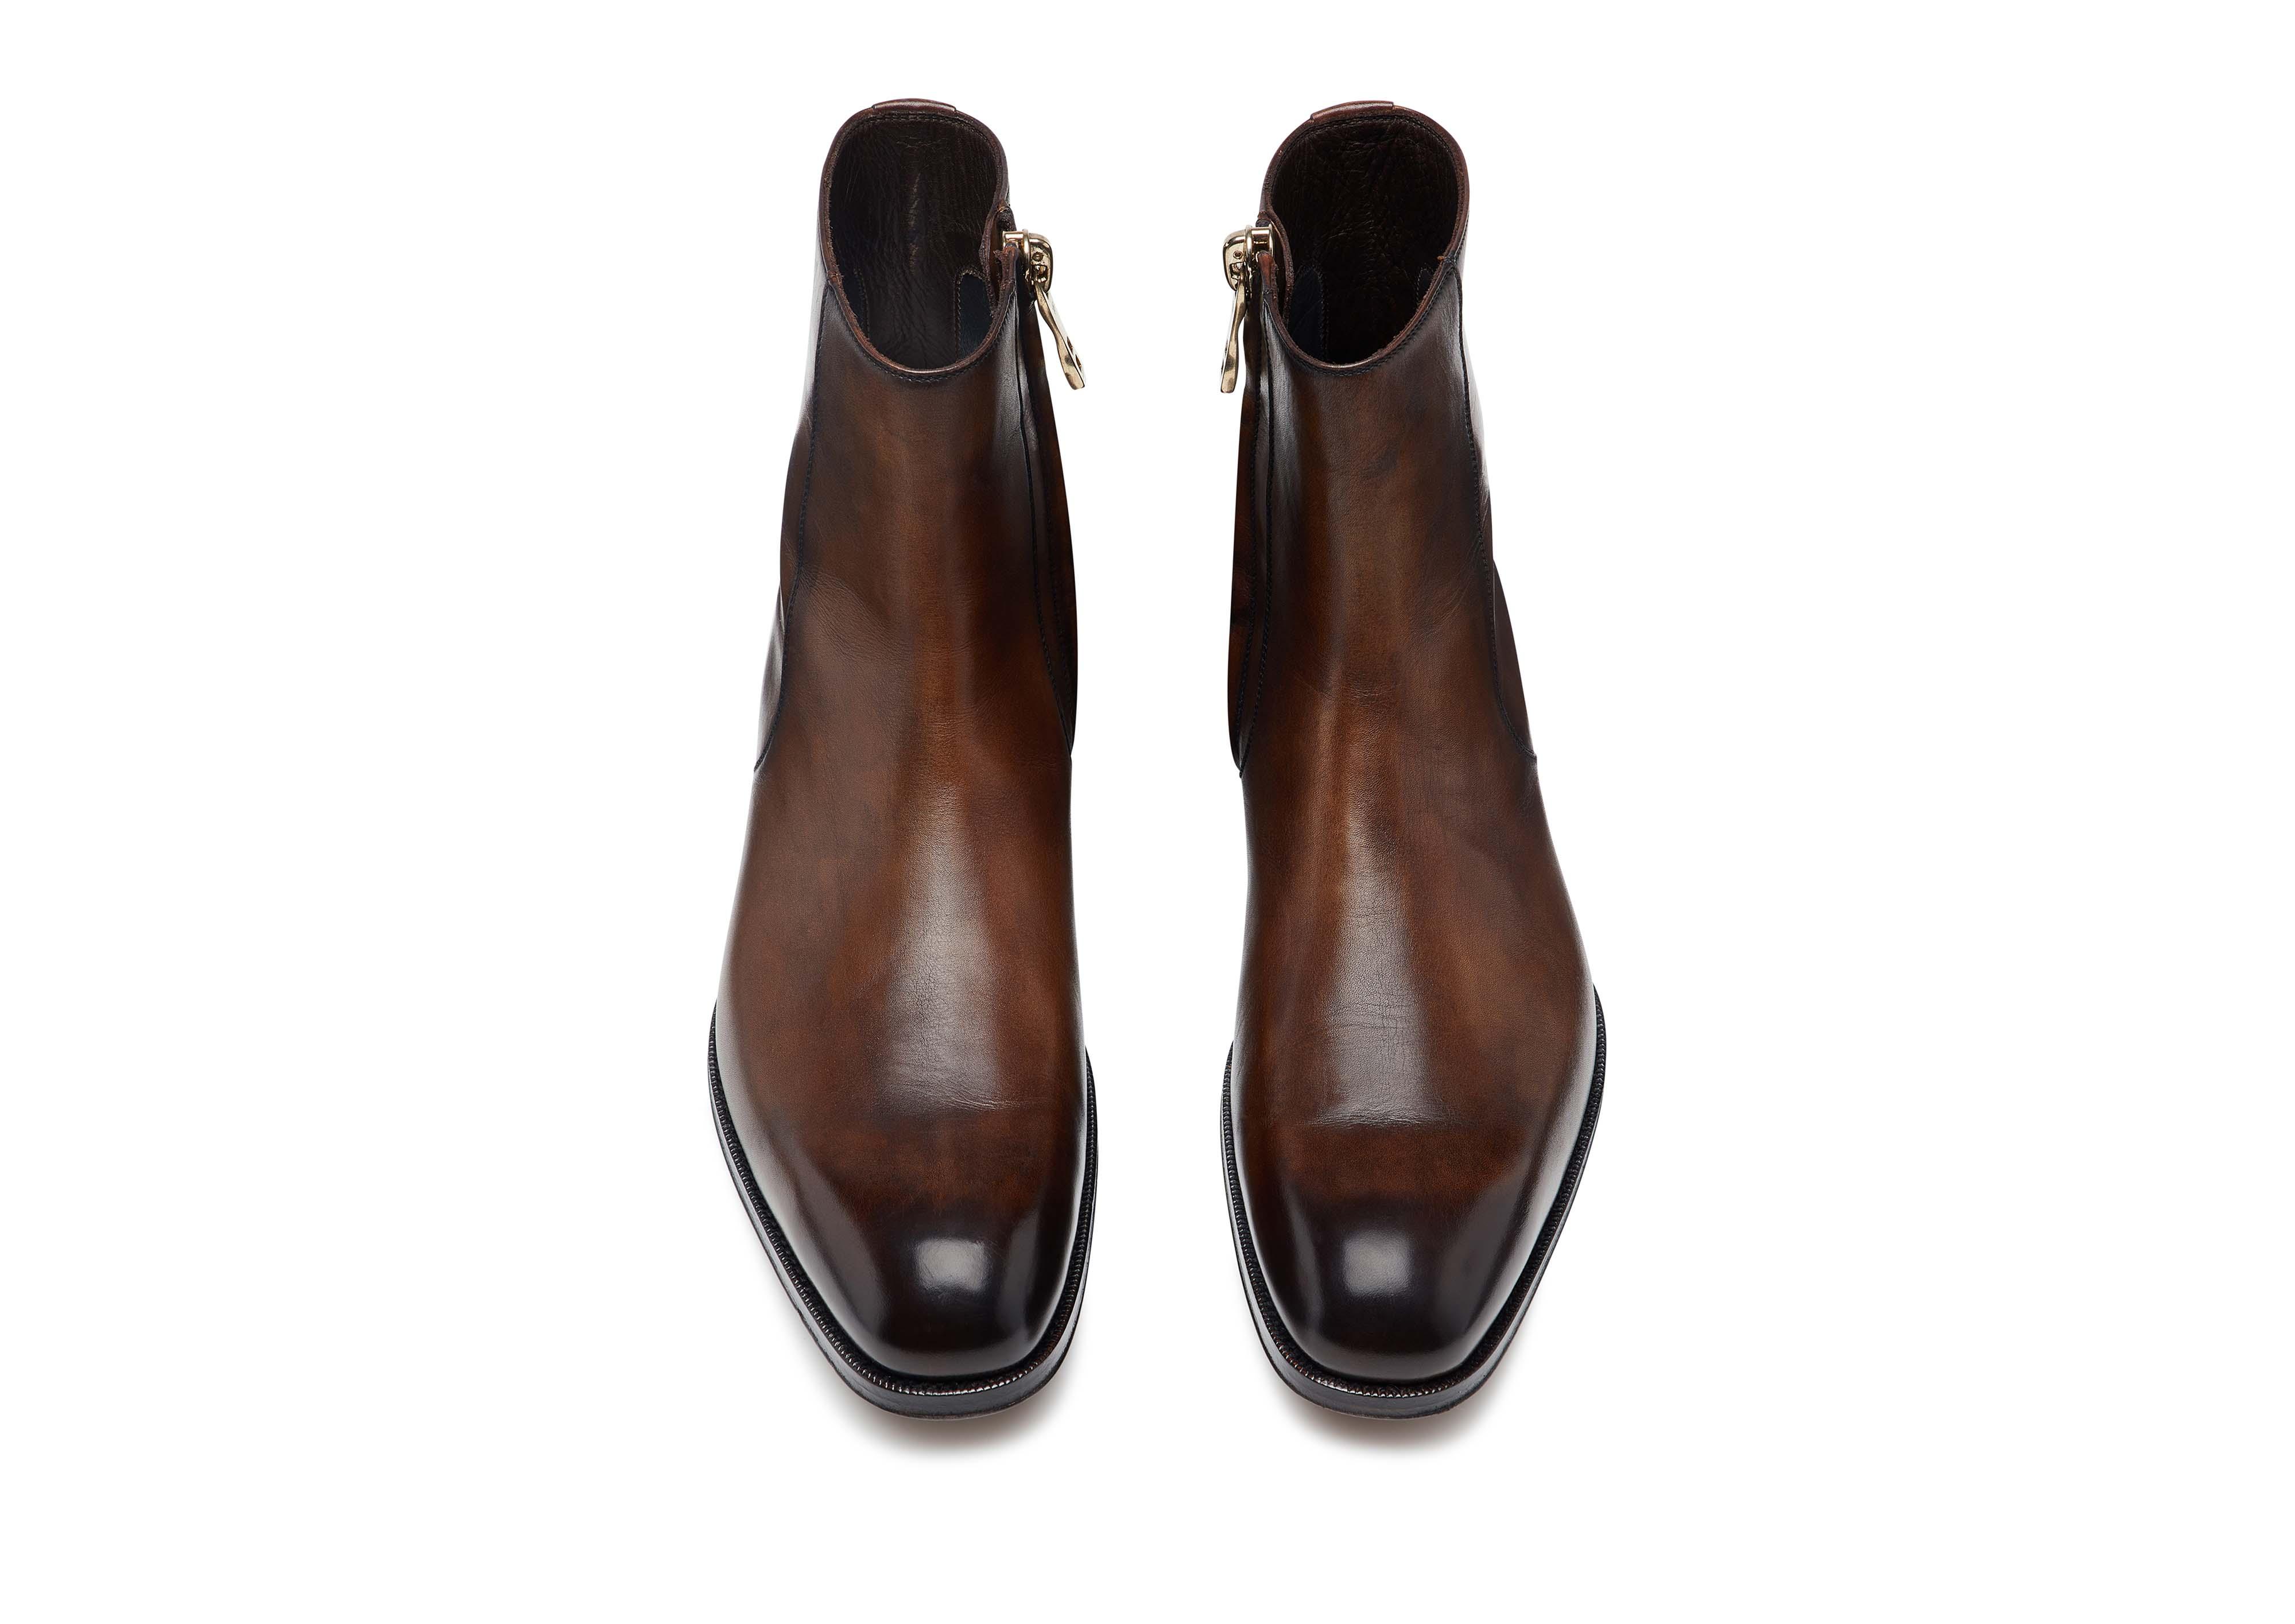 tom ford edgar boots